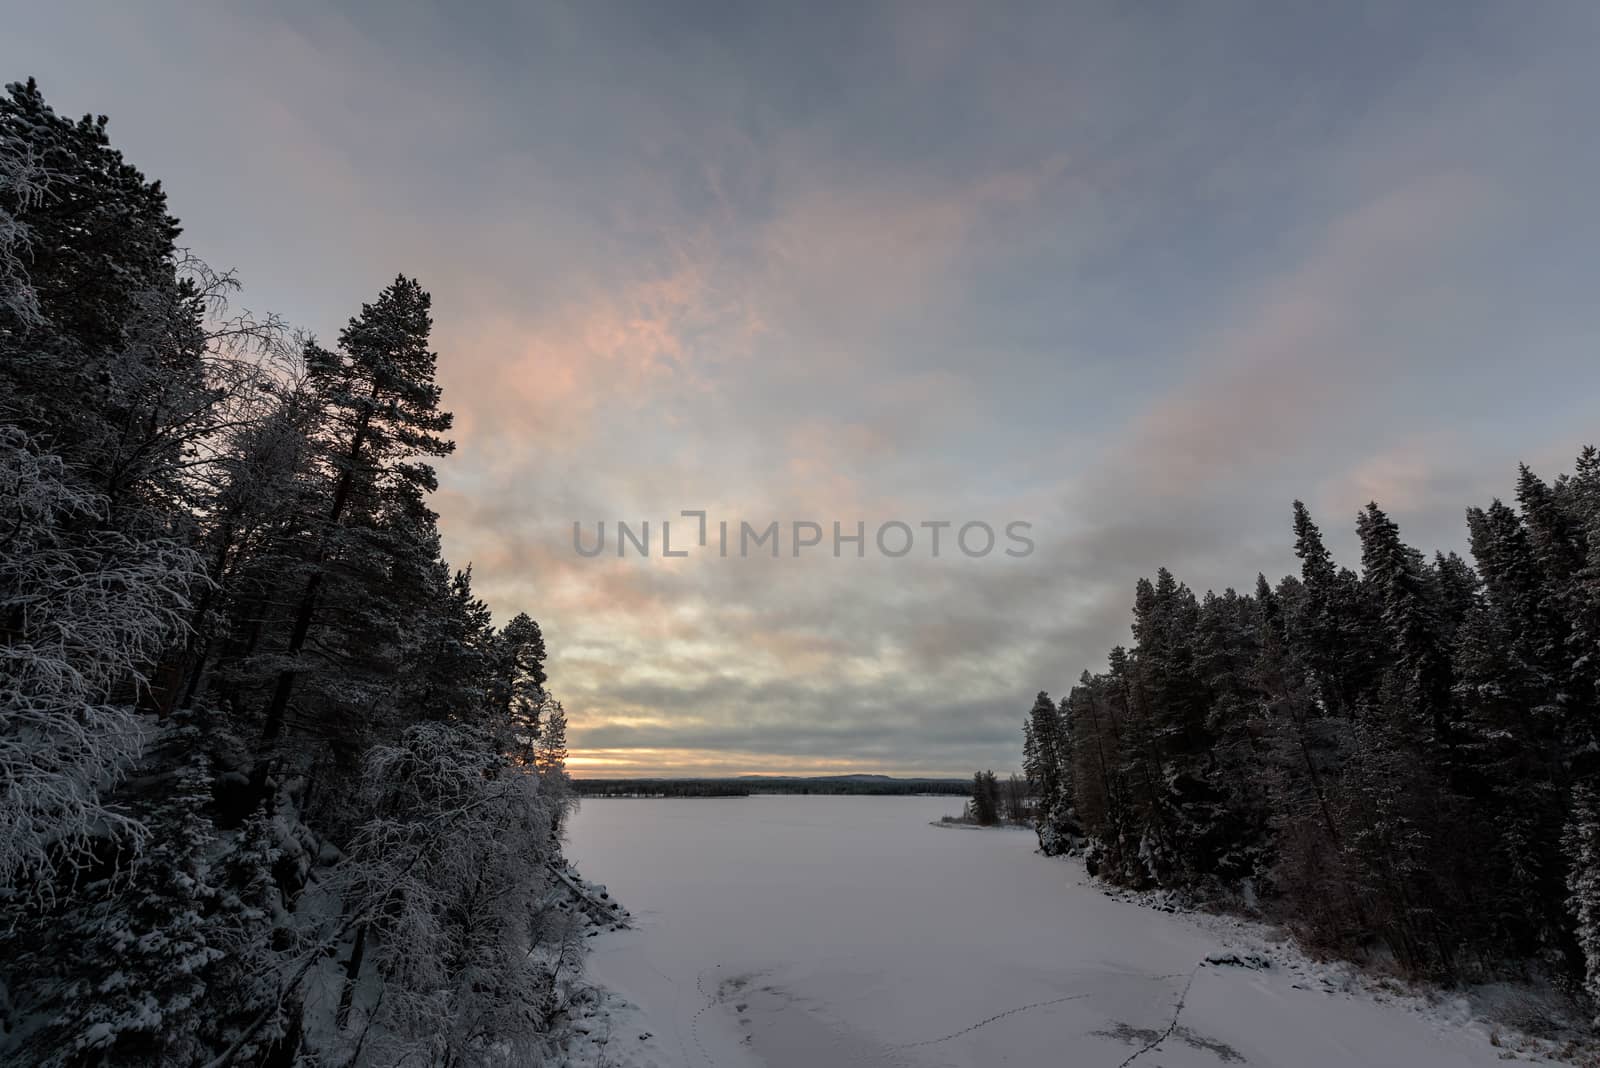 The ice lake has covered with heavy snow and sky in winter season at Oulanka National Park, Finland.